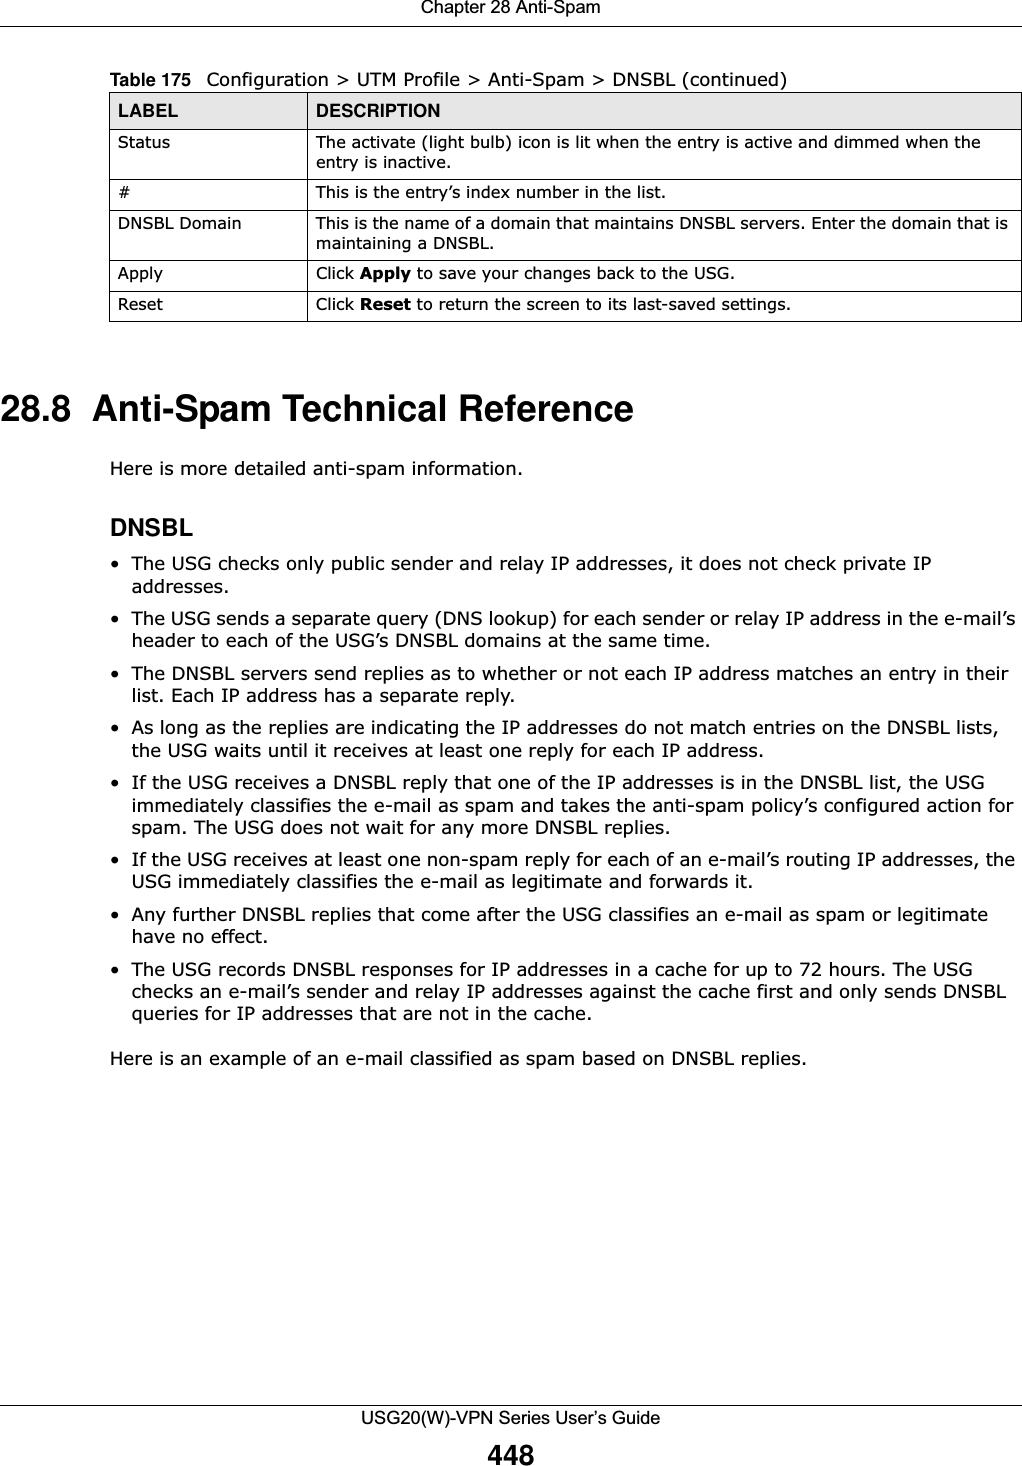 Chapter 28 Anti-SpamUSG20(W)-VPN Series User’s Guide44828.8  Anti-Spam Technical ReferenceHere is more detailed anti-spam information.DNSBL• The USG checks only public sender and relay IP addresses, it does not check private IP addresses.• The USG sends a separate query (DNS lookup) for each sender or relay IP address in the e-mail’s header to each of the USG’s DNSBL domains at the same time. • The DNSBL servers send replies as to whether or not each IP address matches an entry in their list. Each IP address has a separate reply.• As long as the replies are indicating the IP addresses do not match entries on the DNSBL lists, the USG waits until it receives at least one reply for each IP address. • If the USG receives a DNSBL reply that one of the IP addresses is in the DNSBL list, the USG immediately classifies the e-mail as spam and takes the anti-spam policy’s configured action for spam. The USG does not wait for any more DNSBL replies.• If the USG receives at least one non-spam reply for each of an e-mail’s routing IP addresses, the USG immediately classifies the e-mail as legitimate and forwards it.• Any further DNSBL replies that come after the USG classifies an e-mail as spam or legitimate have no effect. • The USG records DNSBL responses for IP addresses in a cache for up to 72 hours. The USG checks an e-mail’s sender and relay IP addresses against the cache first and only sends DNSBL queries for IP addresses that are not in the cache.Here is an example of an e-mail classified as spam based on DNSBL replies. Status The activate (light bulb) icon is lit when the entry is active and dimmed when the entry is inactive.#This is the entry’s index number in the list.DNSBL Domain This is the name of a domain that maintains DNSBL servers. Enter the domain that is maintaining a DNSBL.Apply Click Apply to save your changes back to the USG.Reset Click Reset to return the screen to its last-saved settings. Table 175   Configuration &gt; UTM Profile &gt; Anti-Spam &gt; DNSBL (continued)LABEL DESCRIPTION